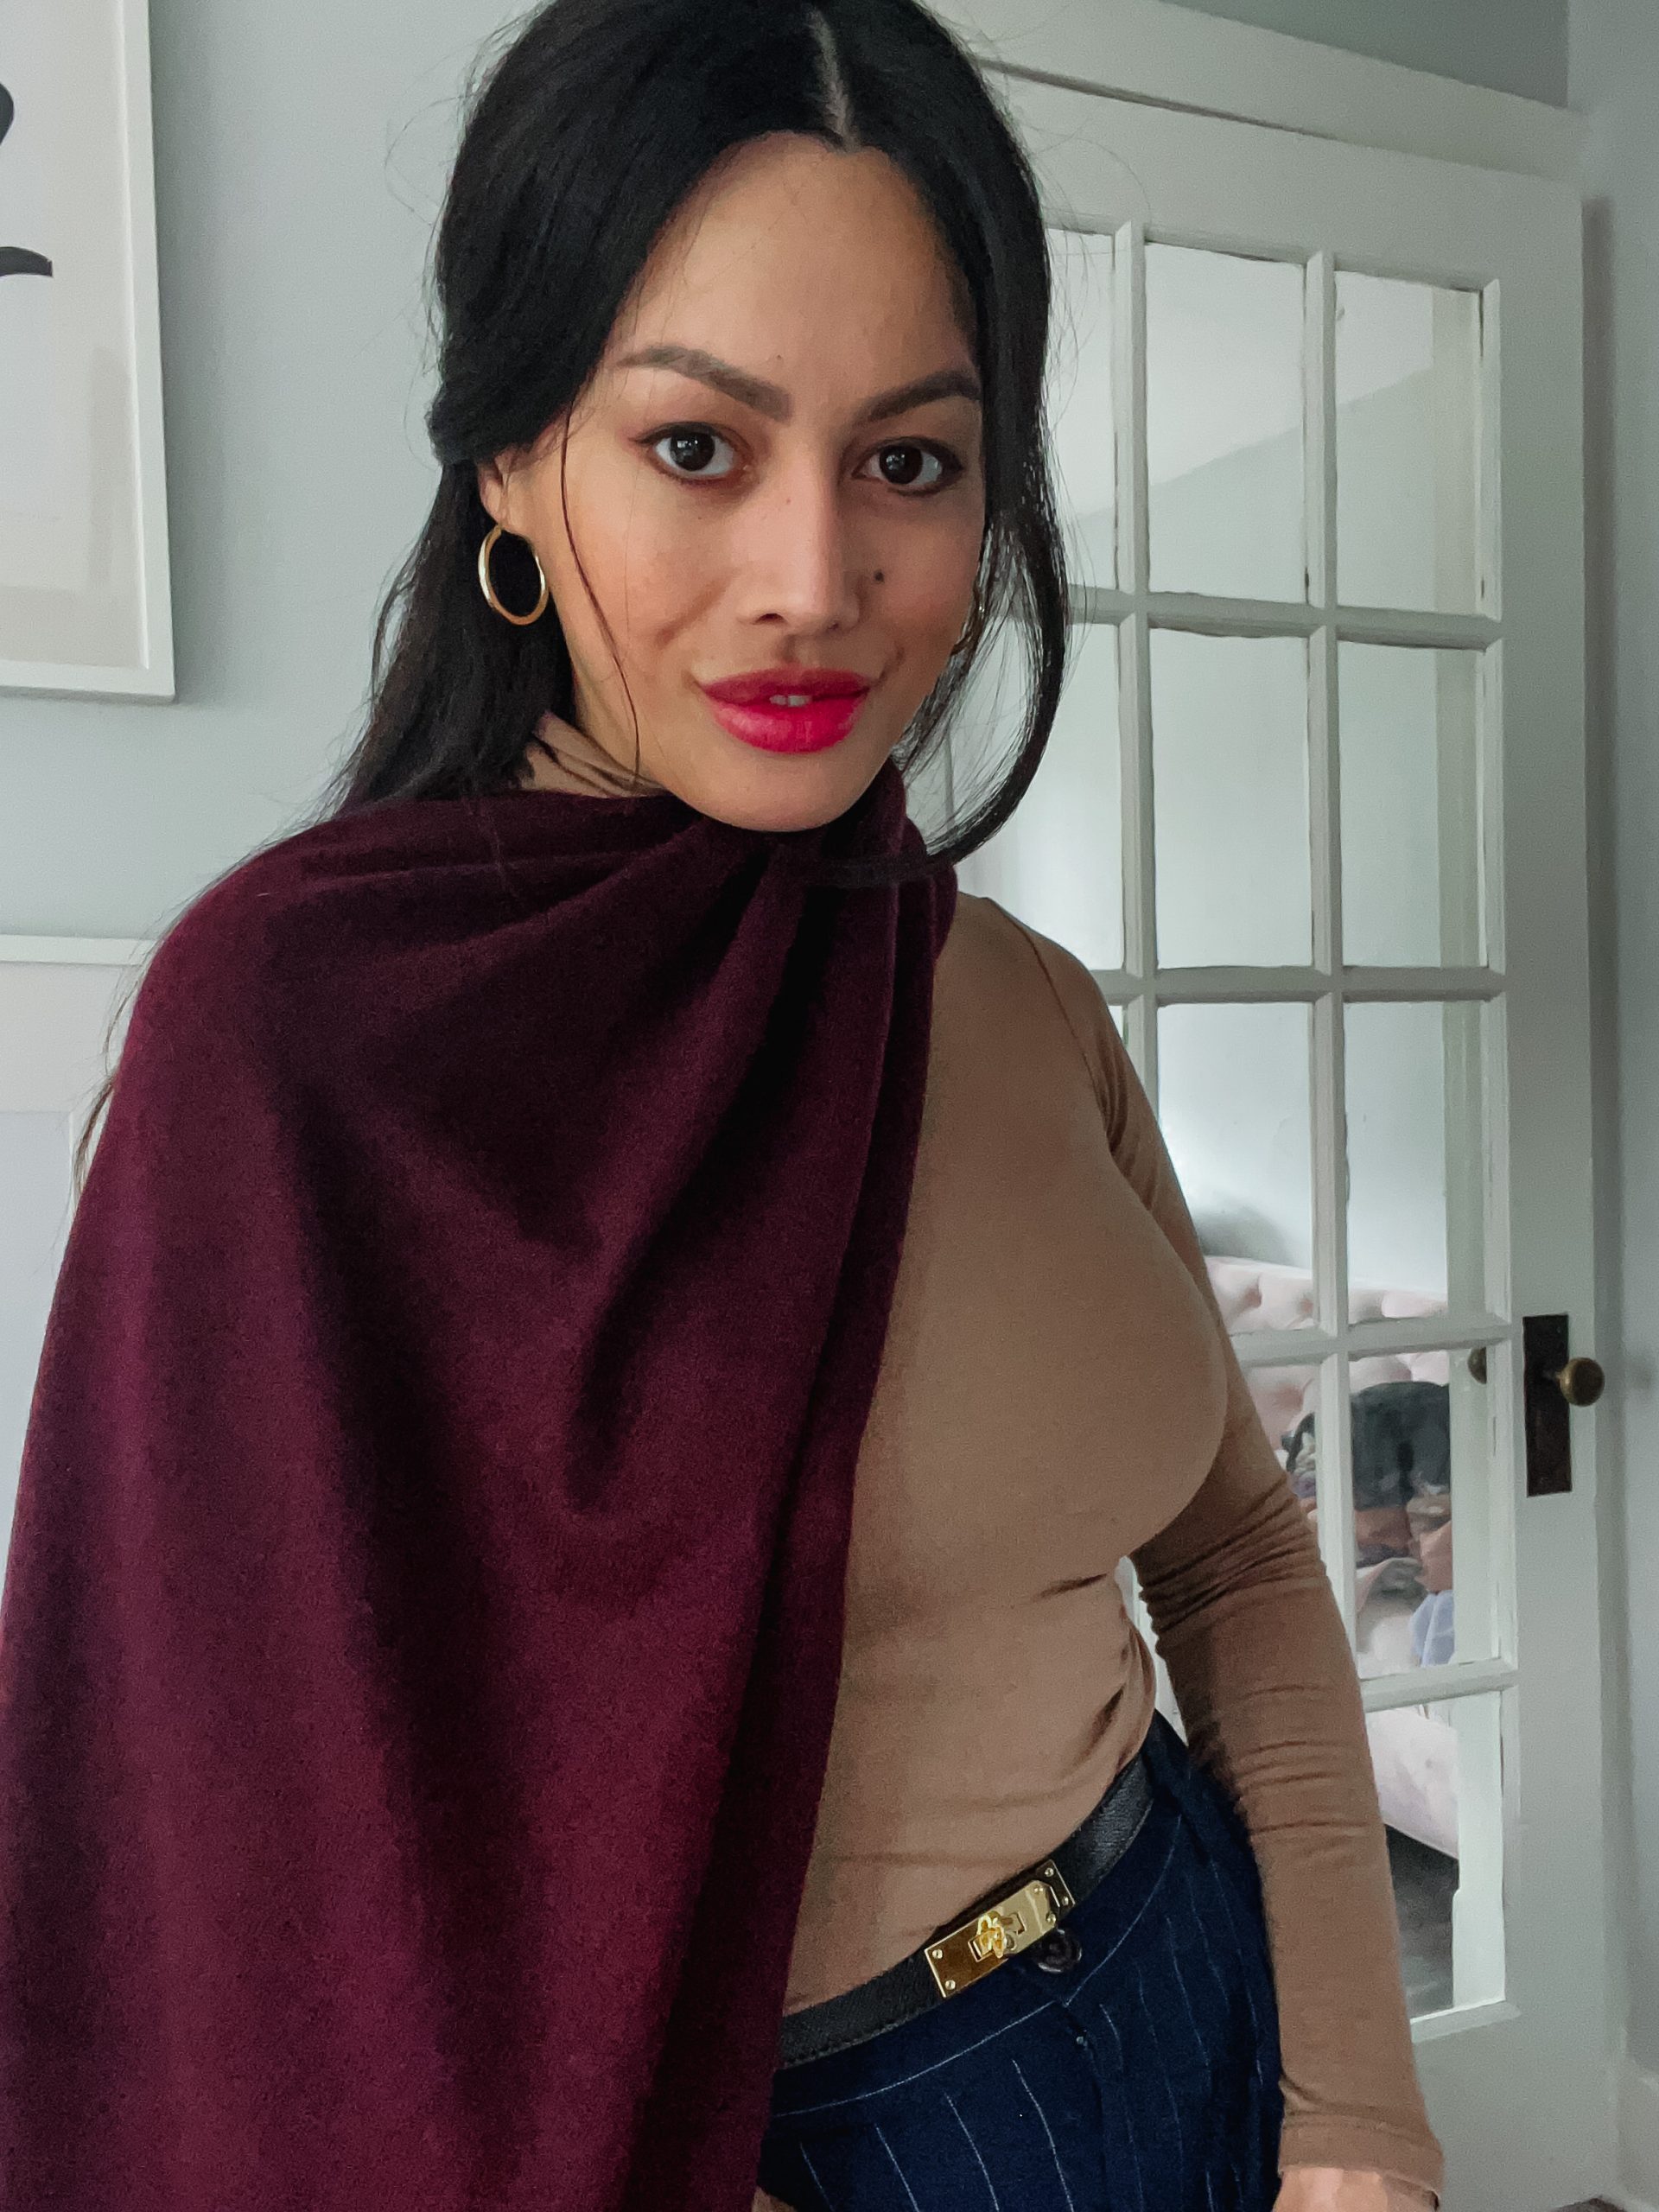 The 100% cashmere wrap under $100 that makes you look like $1 million 